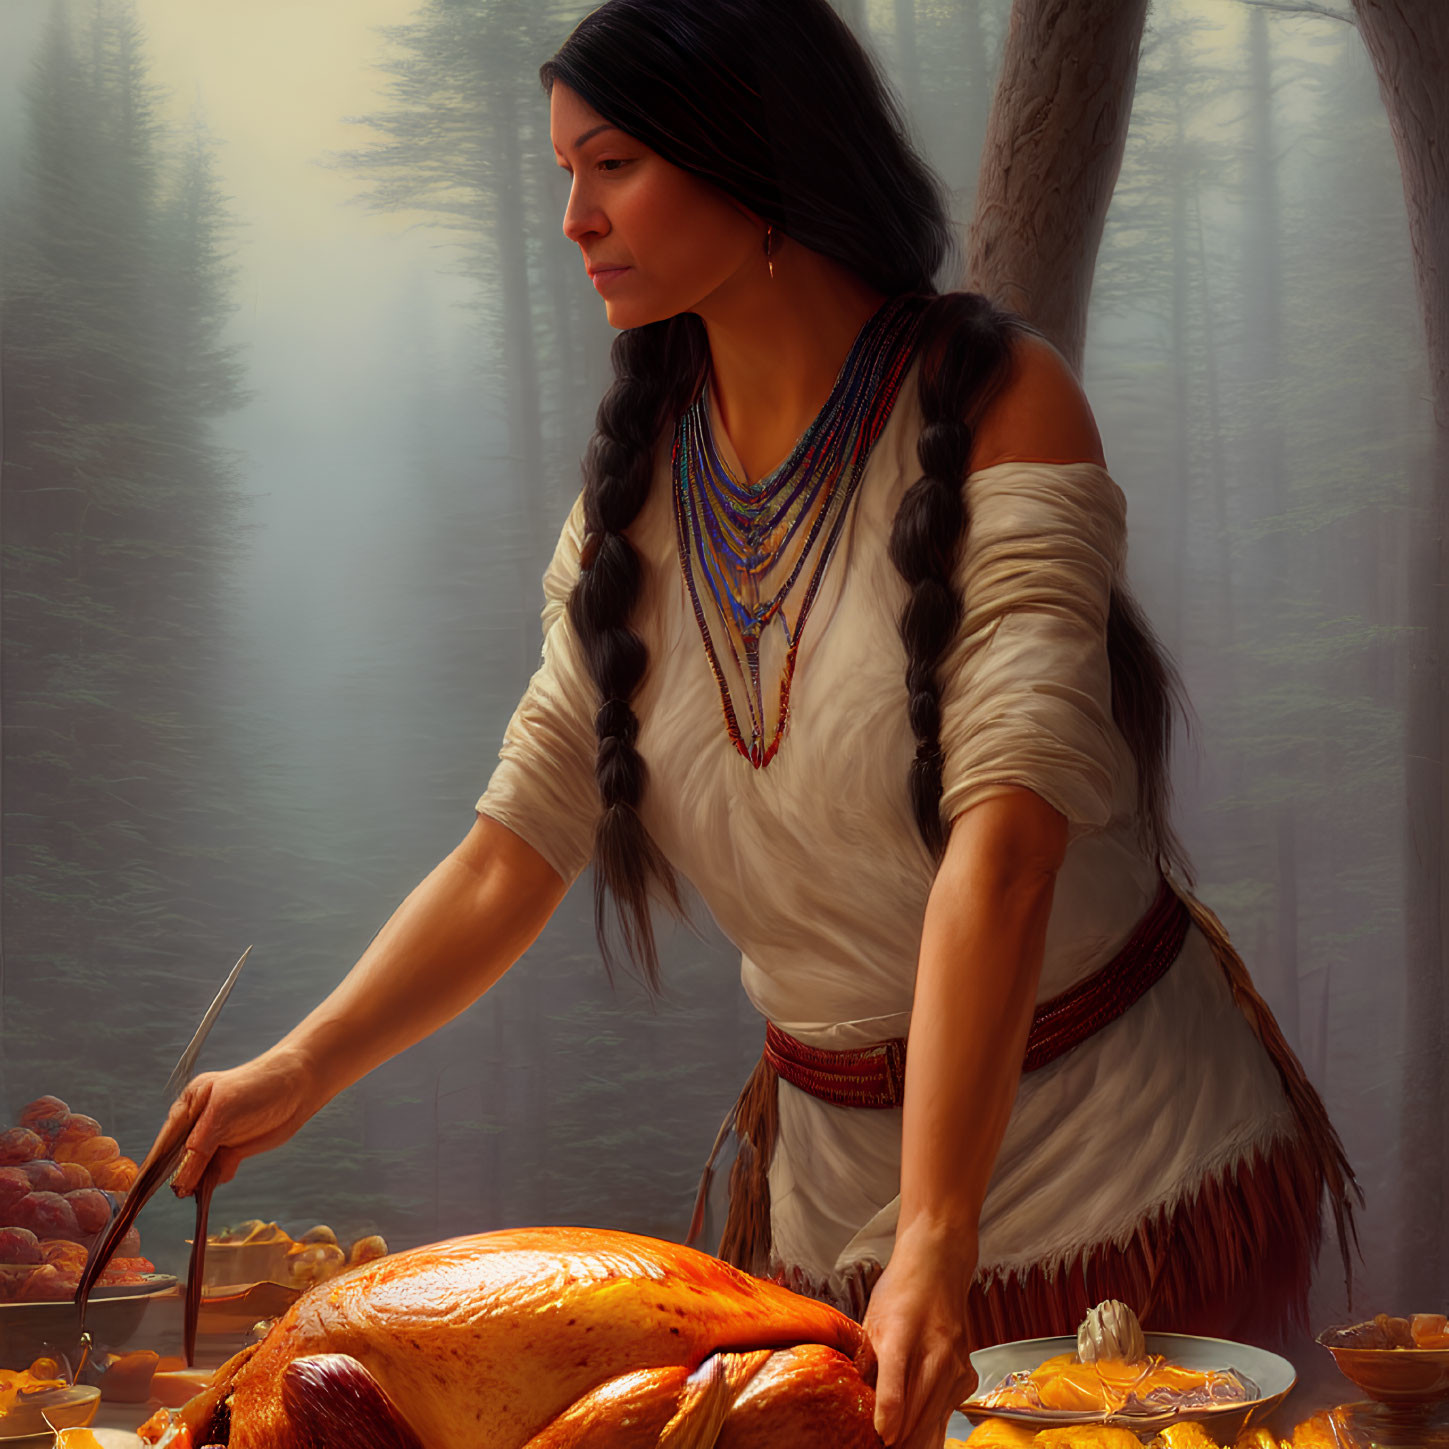 Traditional Native American woman cooking with turkey in forest setting